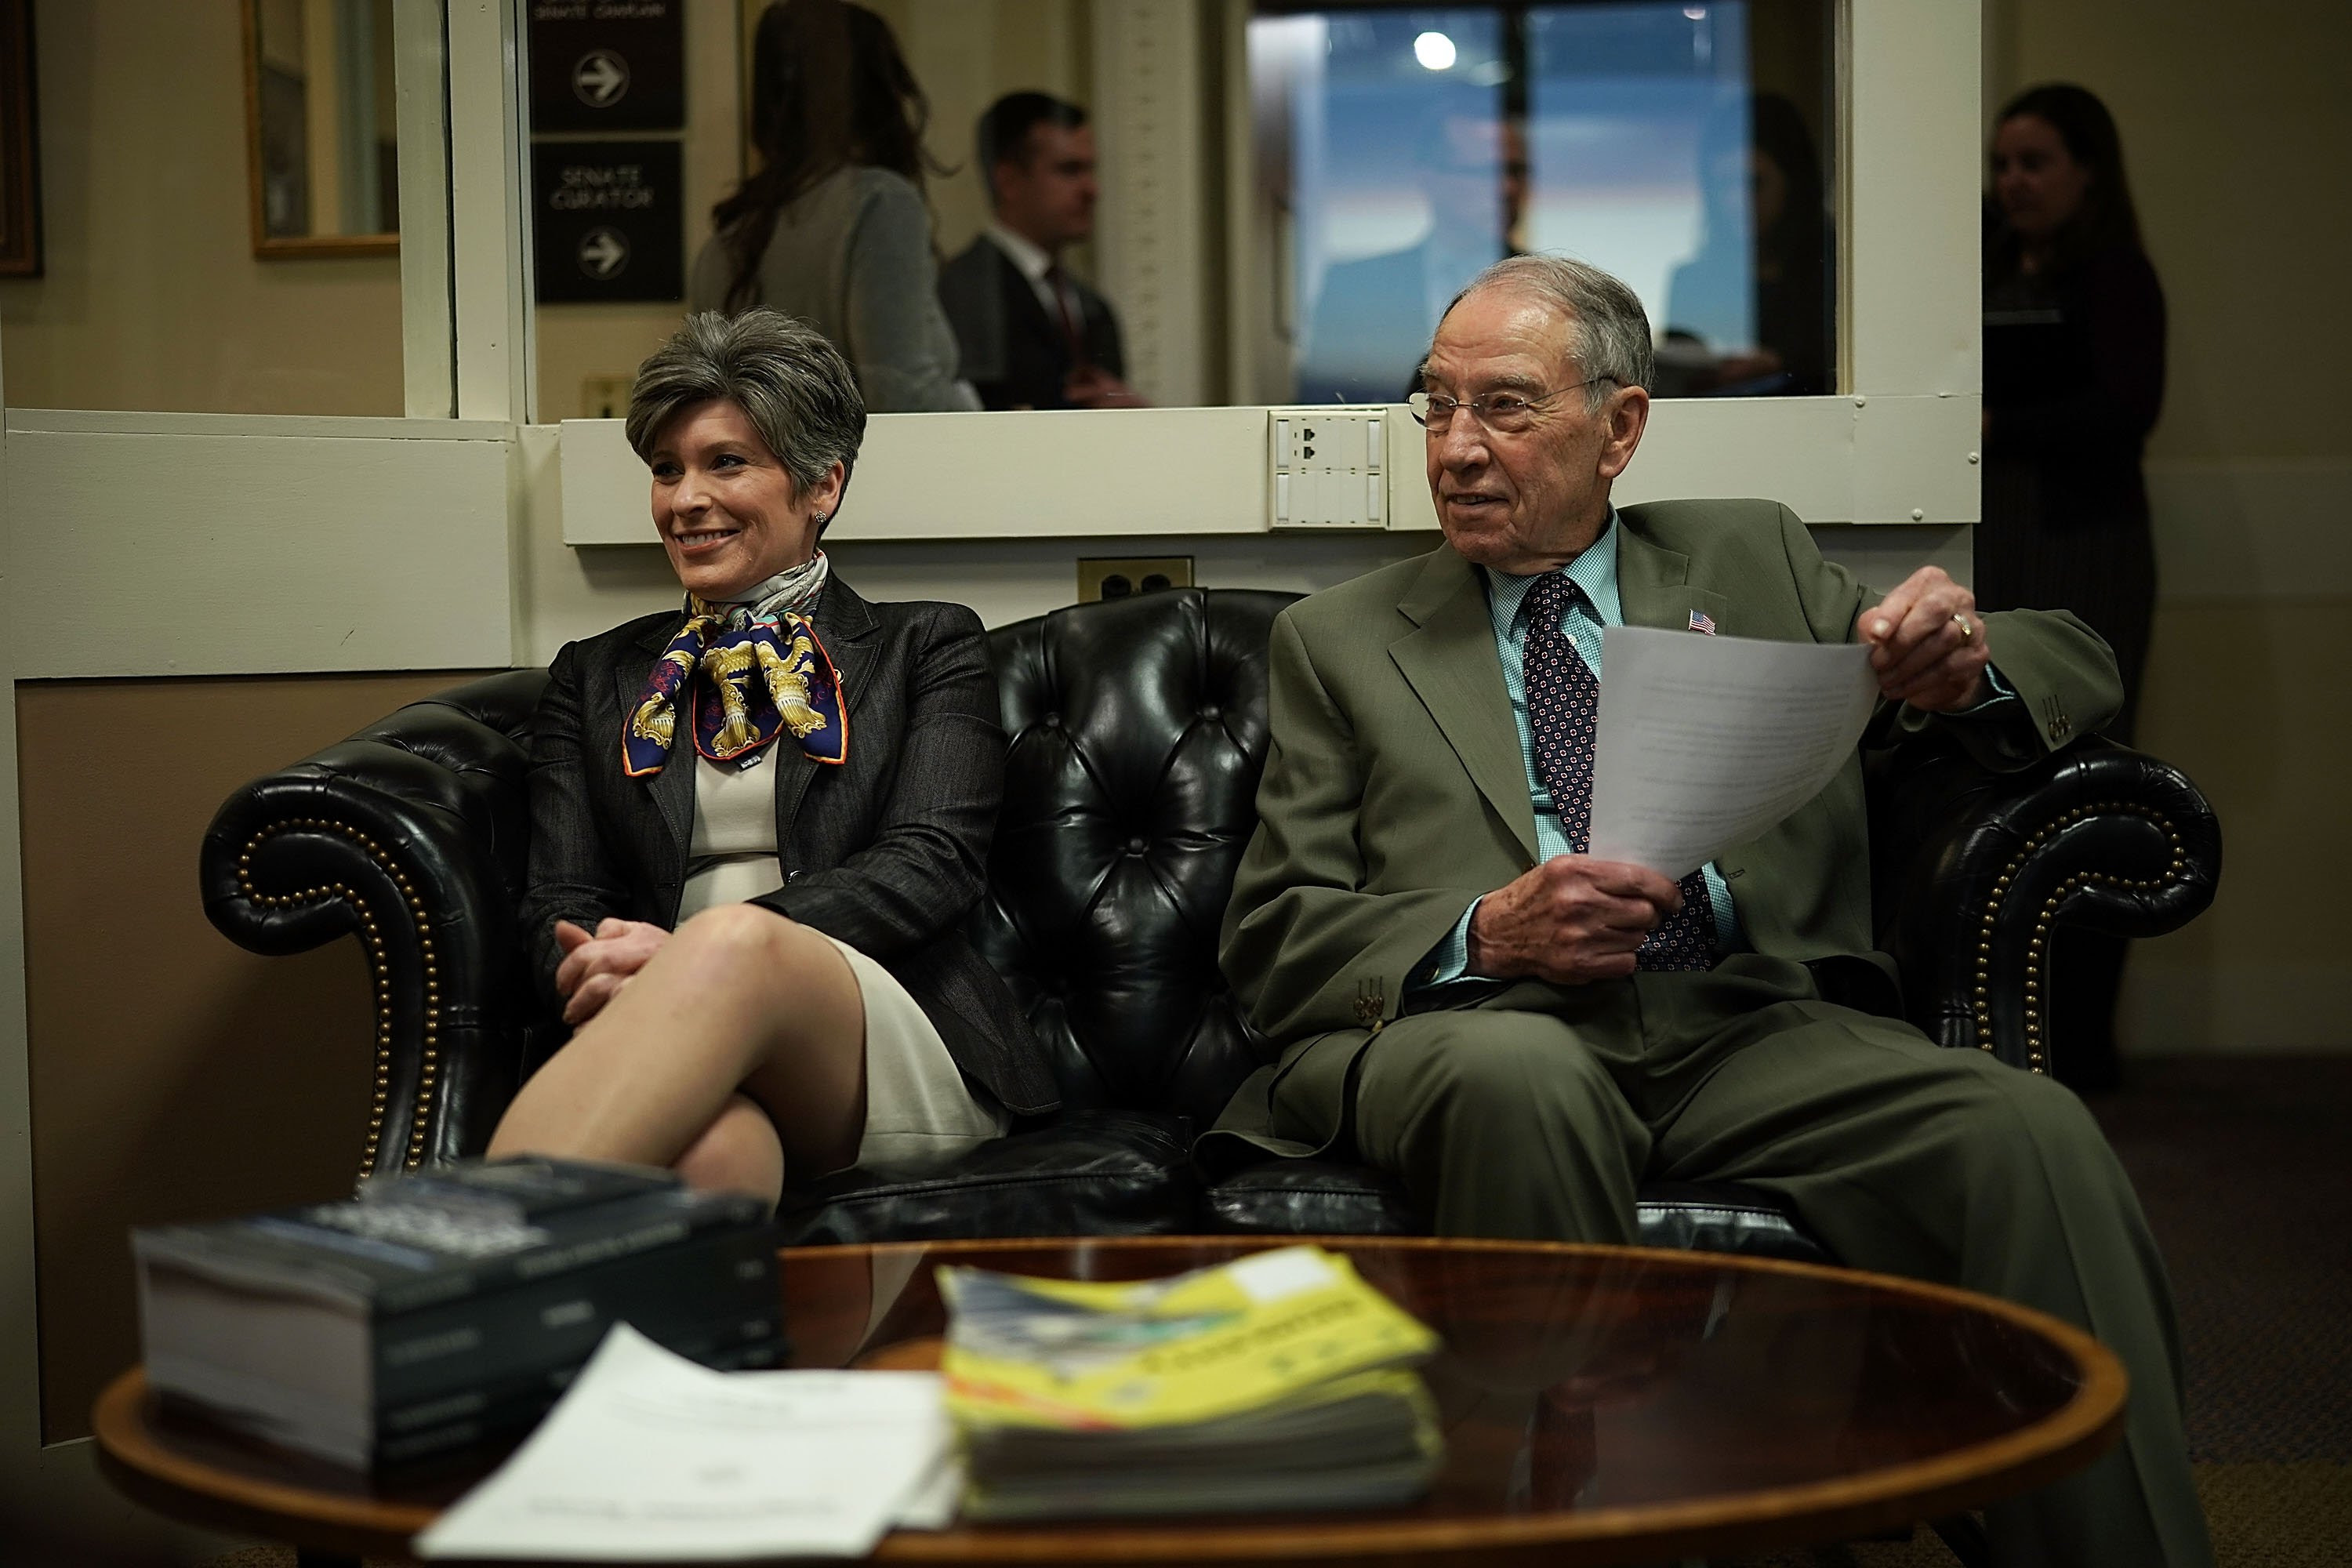 U.S. Sens. Chuck Grassley (R) and Joni Ernst wait for the beginning of a news conference on immigration February 12, 2018 at the Capitol in Washington, DC. (Photo by Alex Wong/Getty Images)